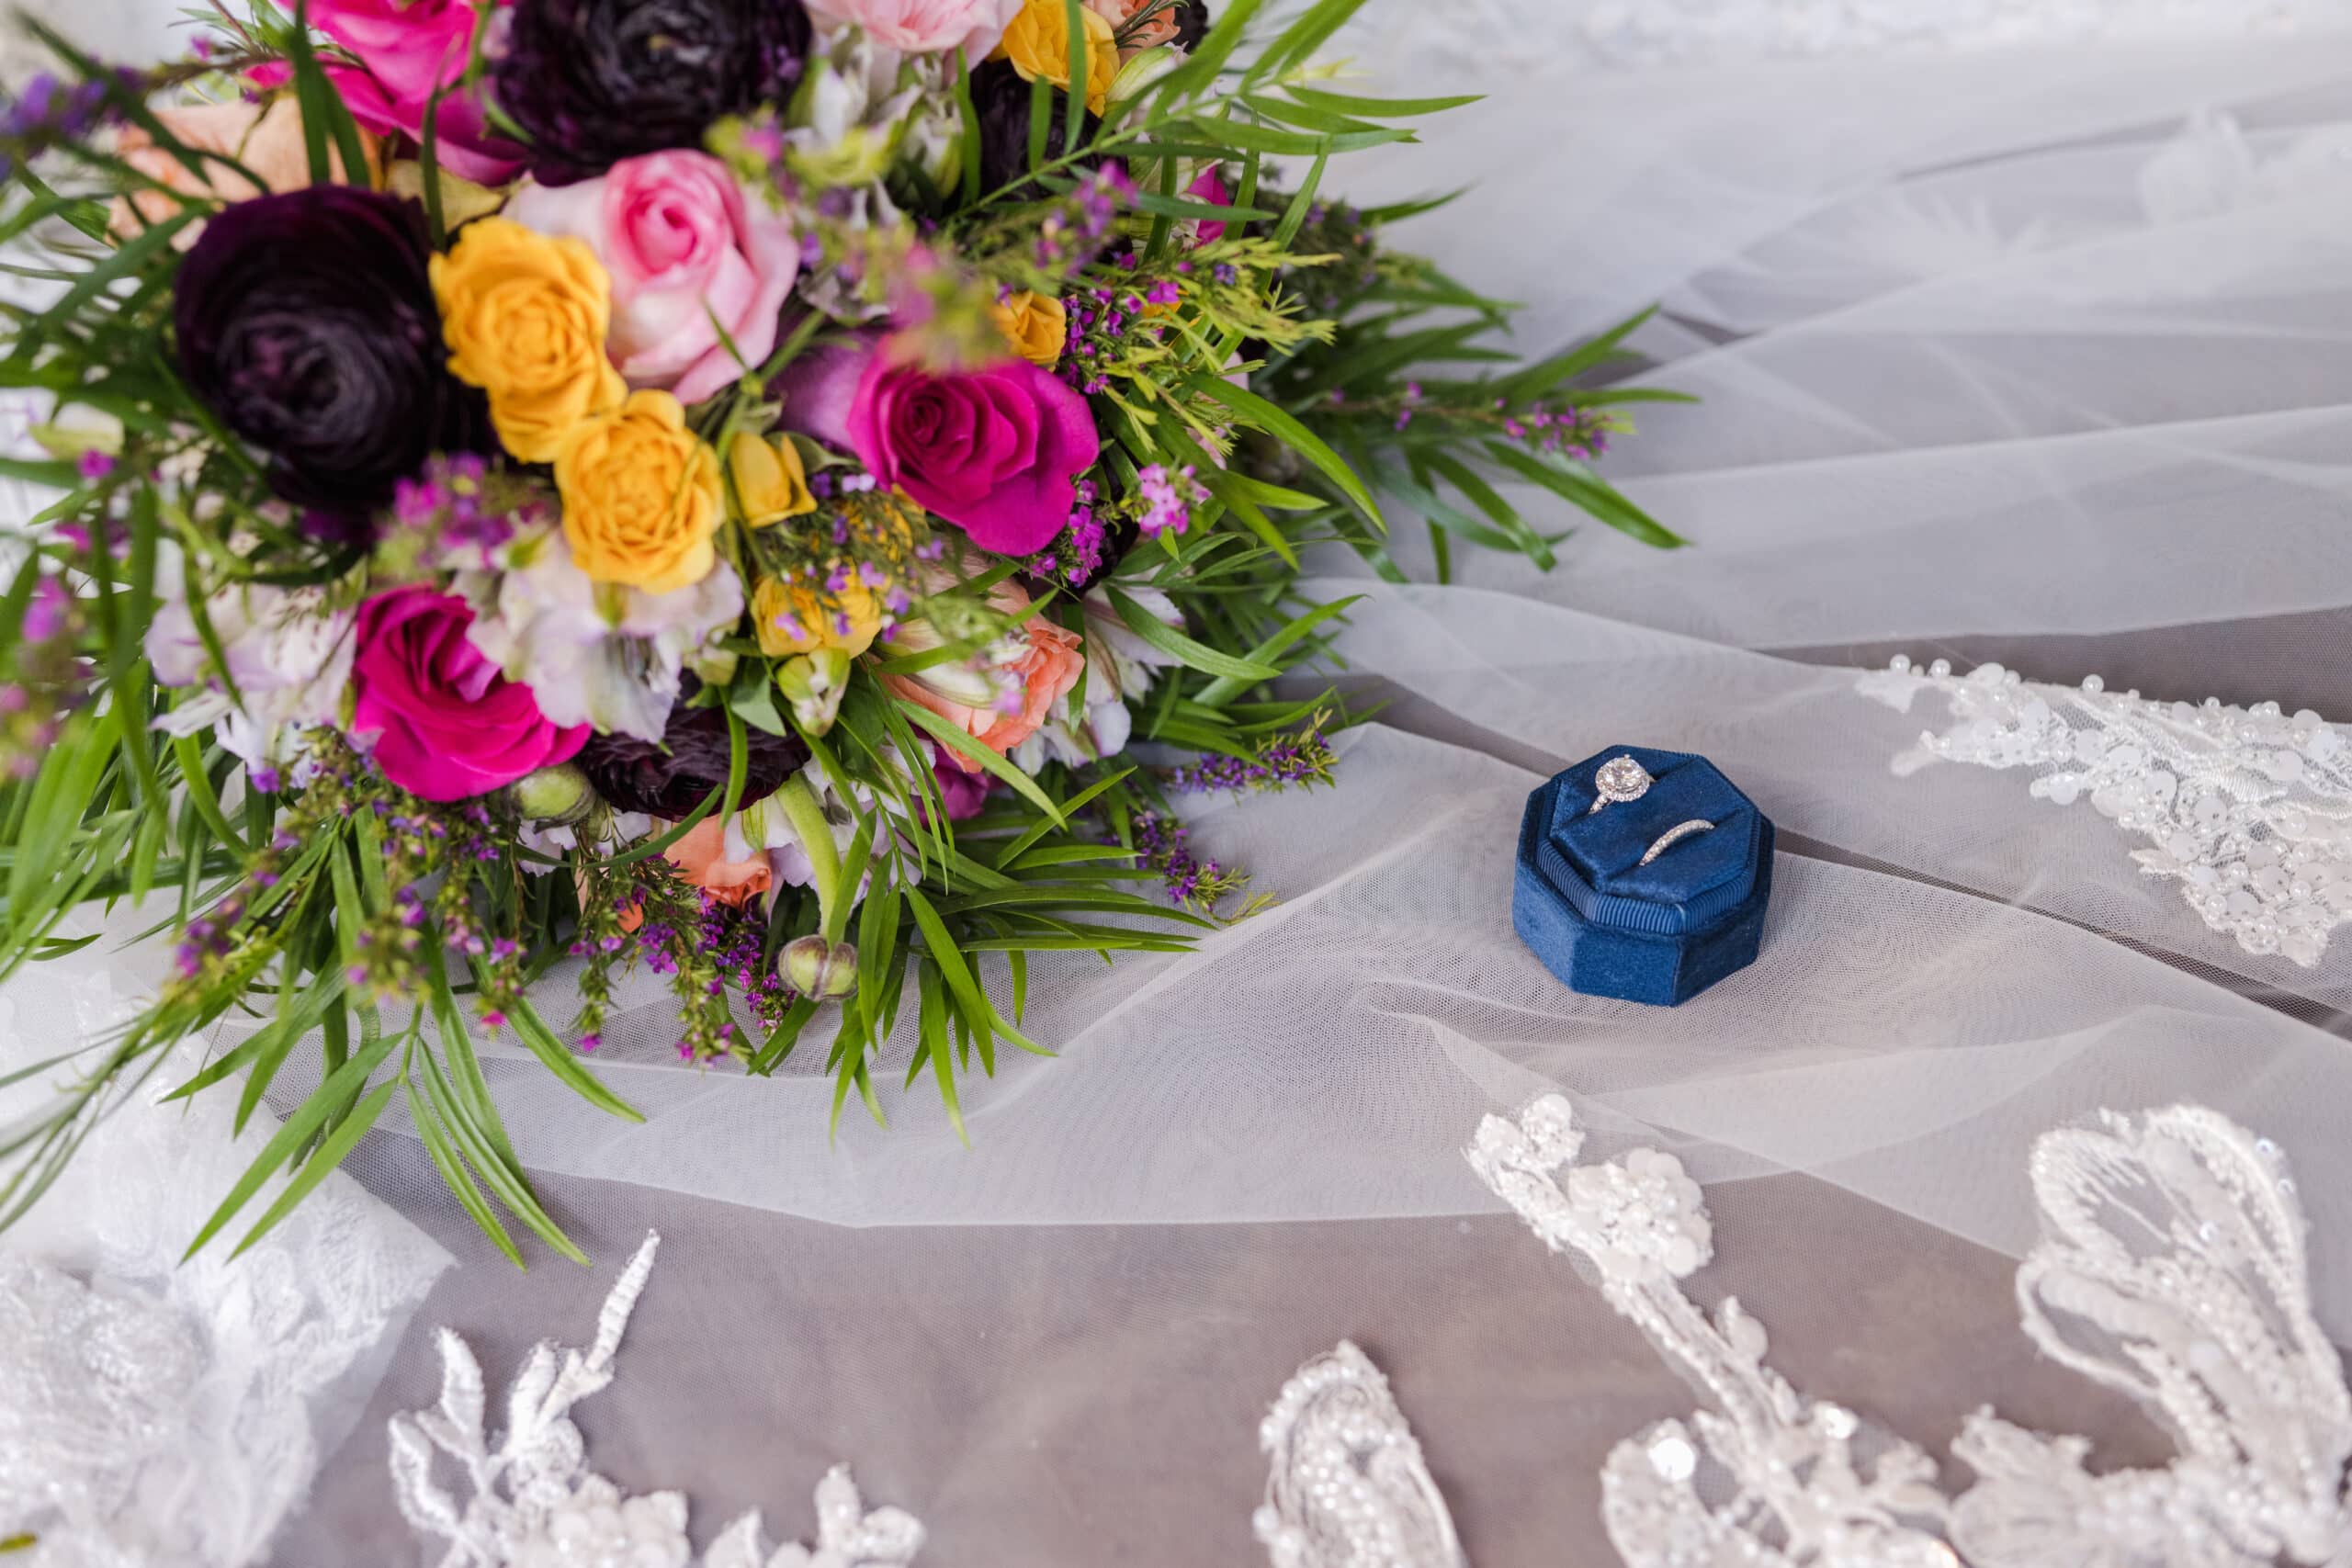 Never Lose Your Wedding Photos With Cloud NAS Storage